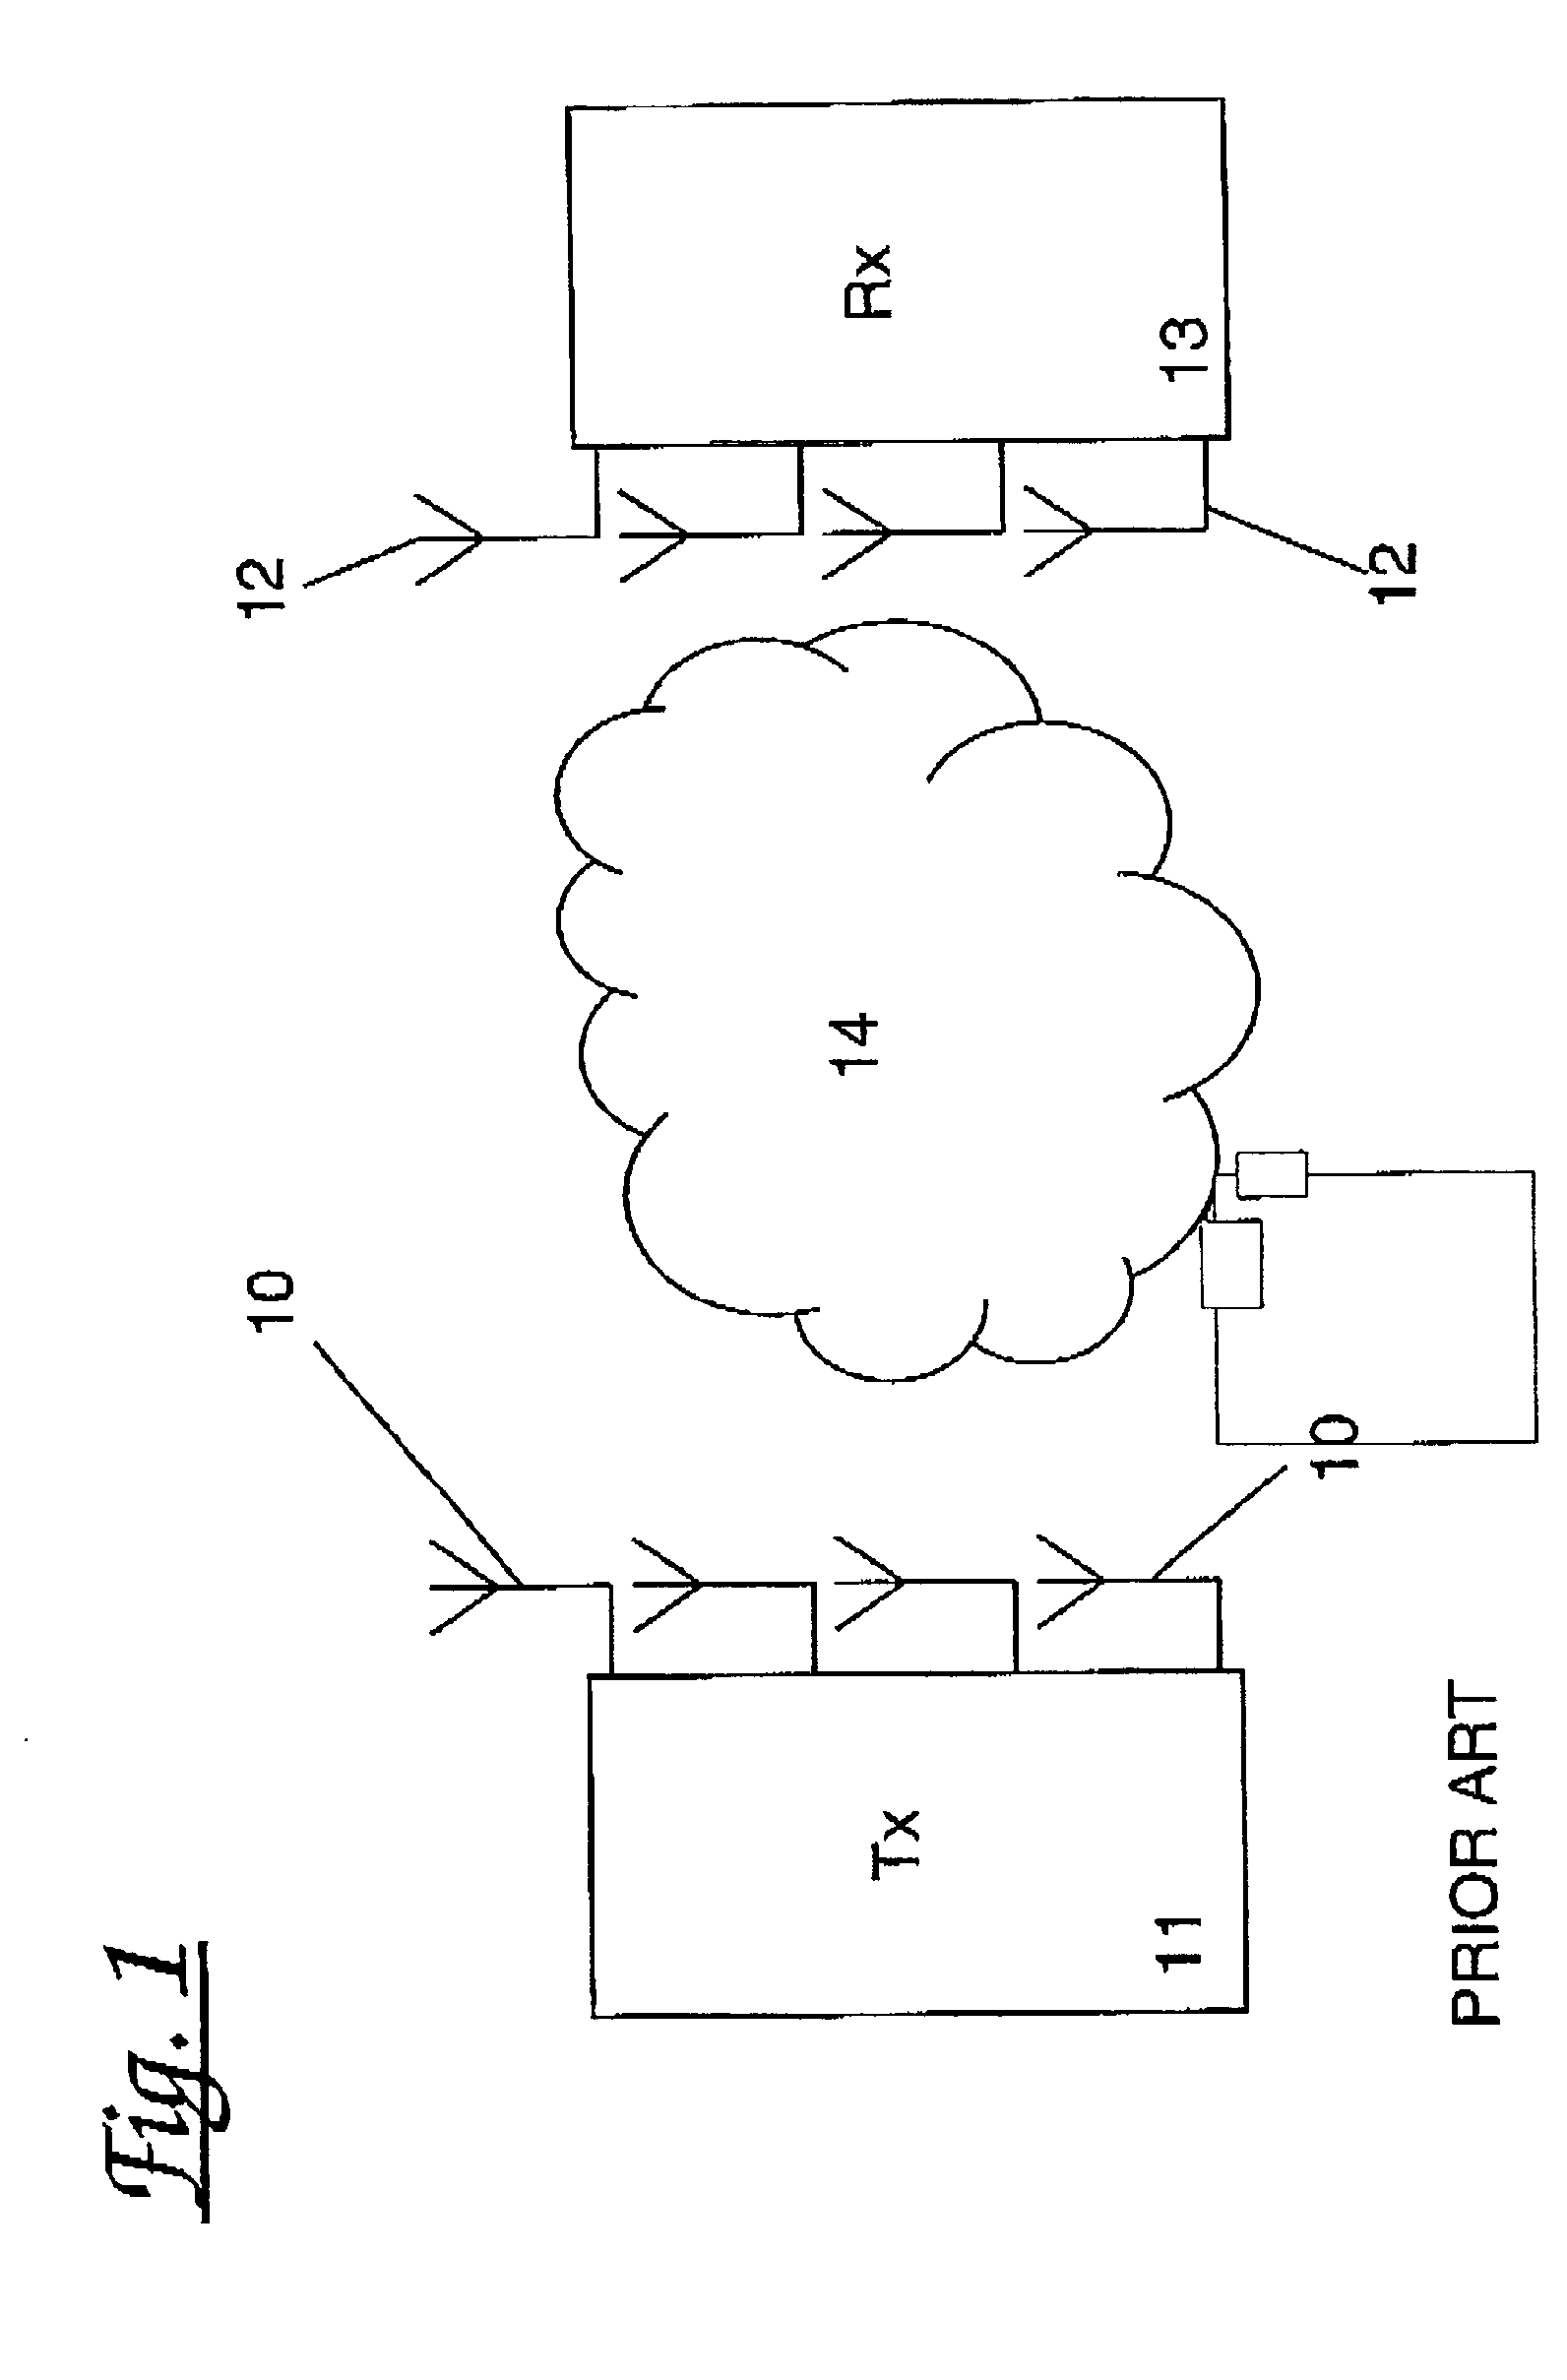 Method of controlling a communications link